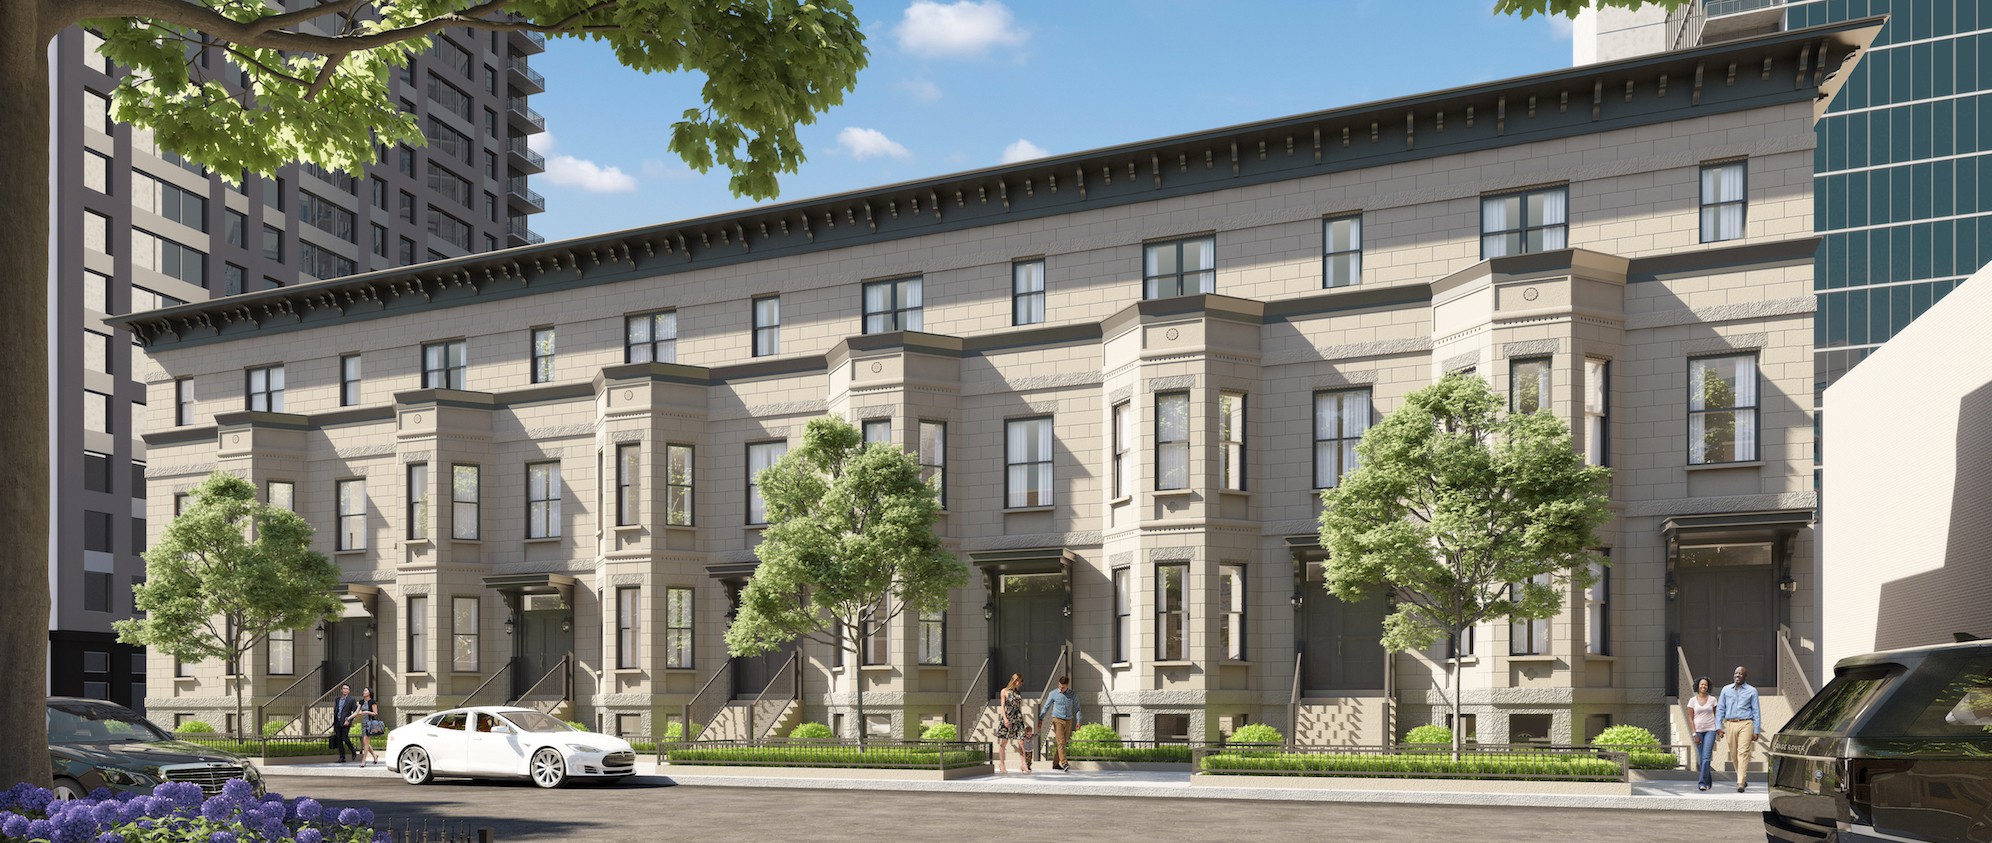 chestnut row townhomes for rent